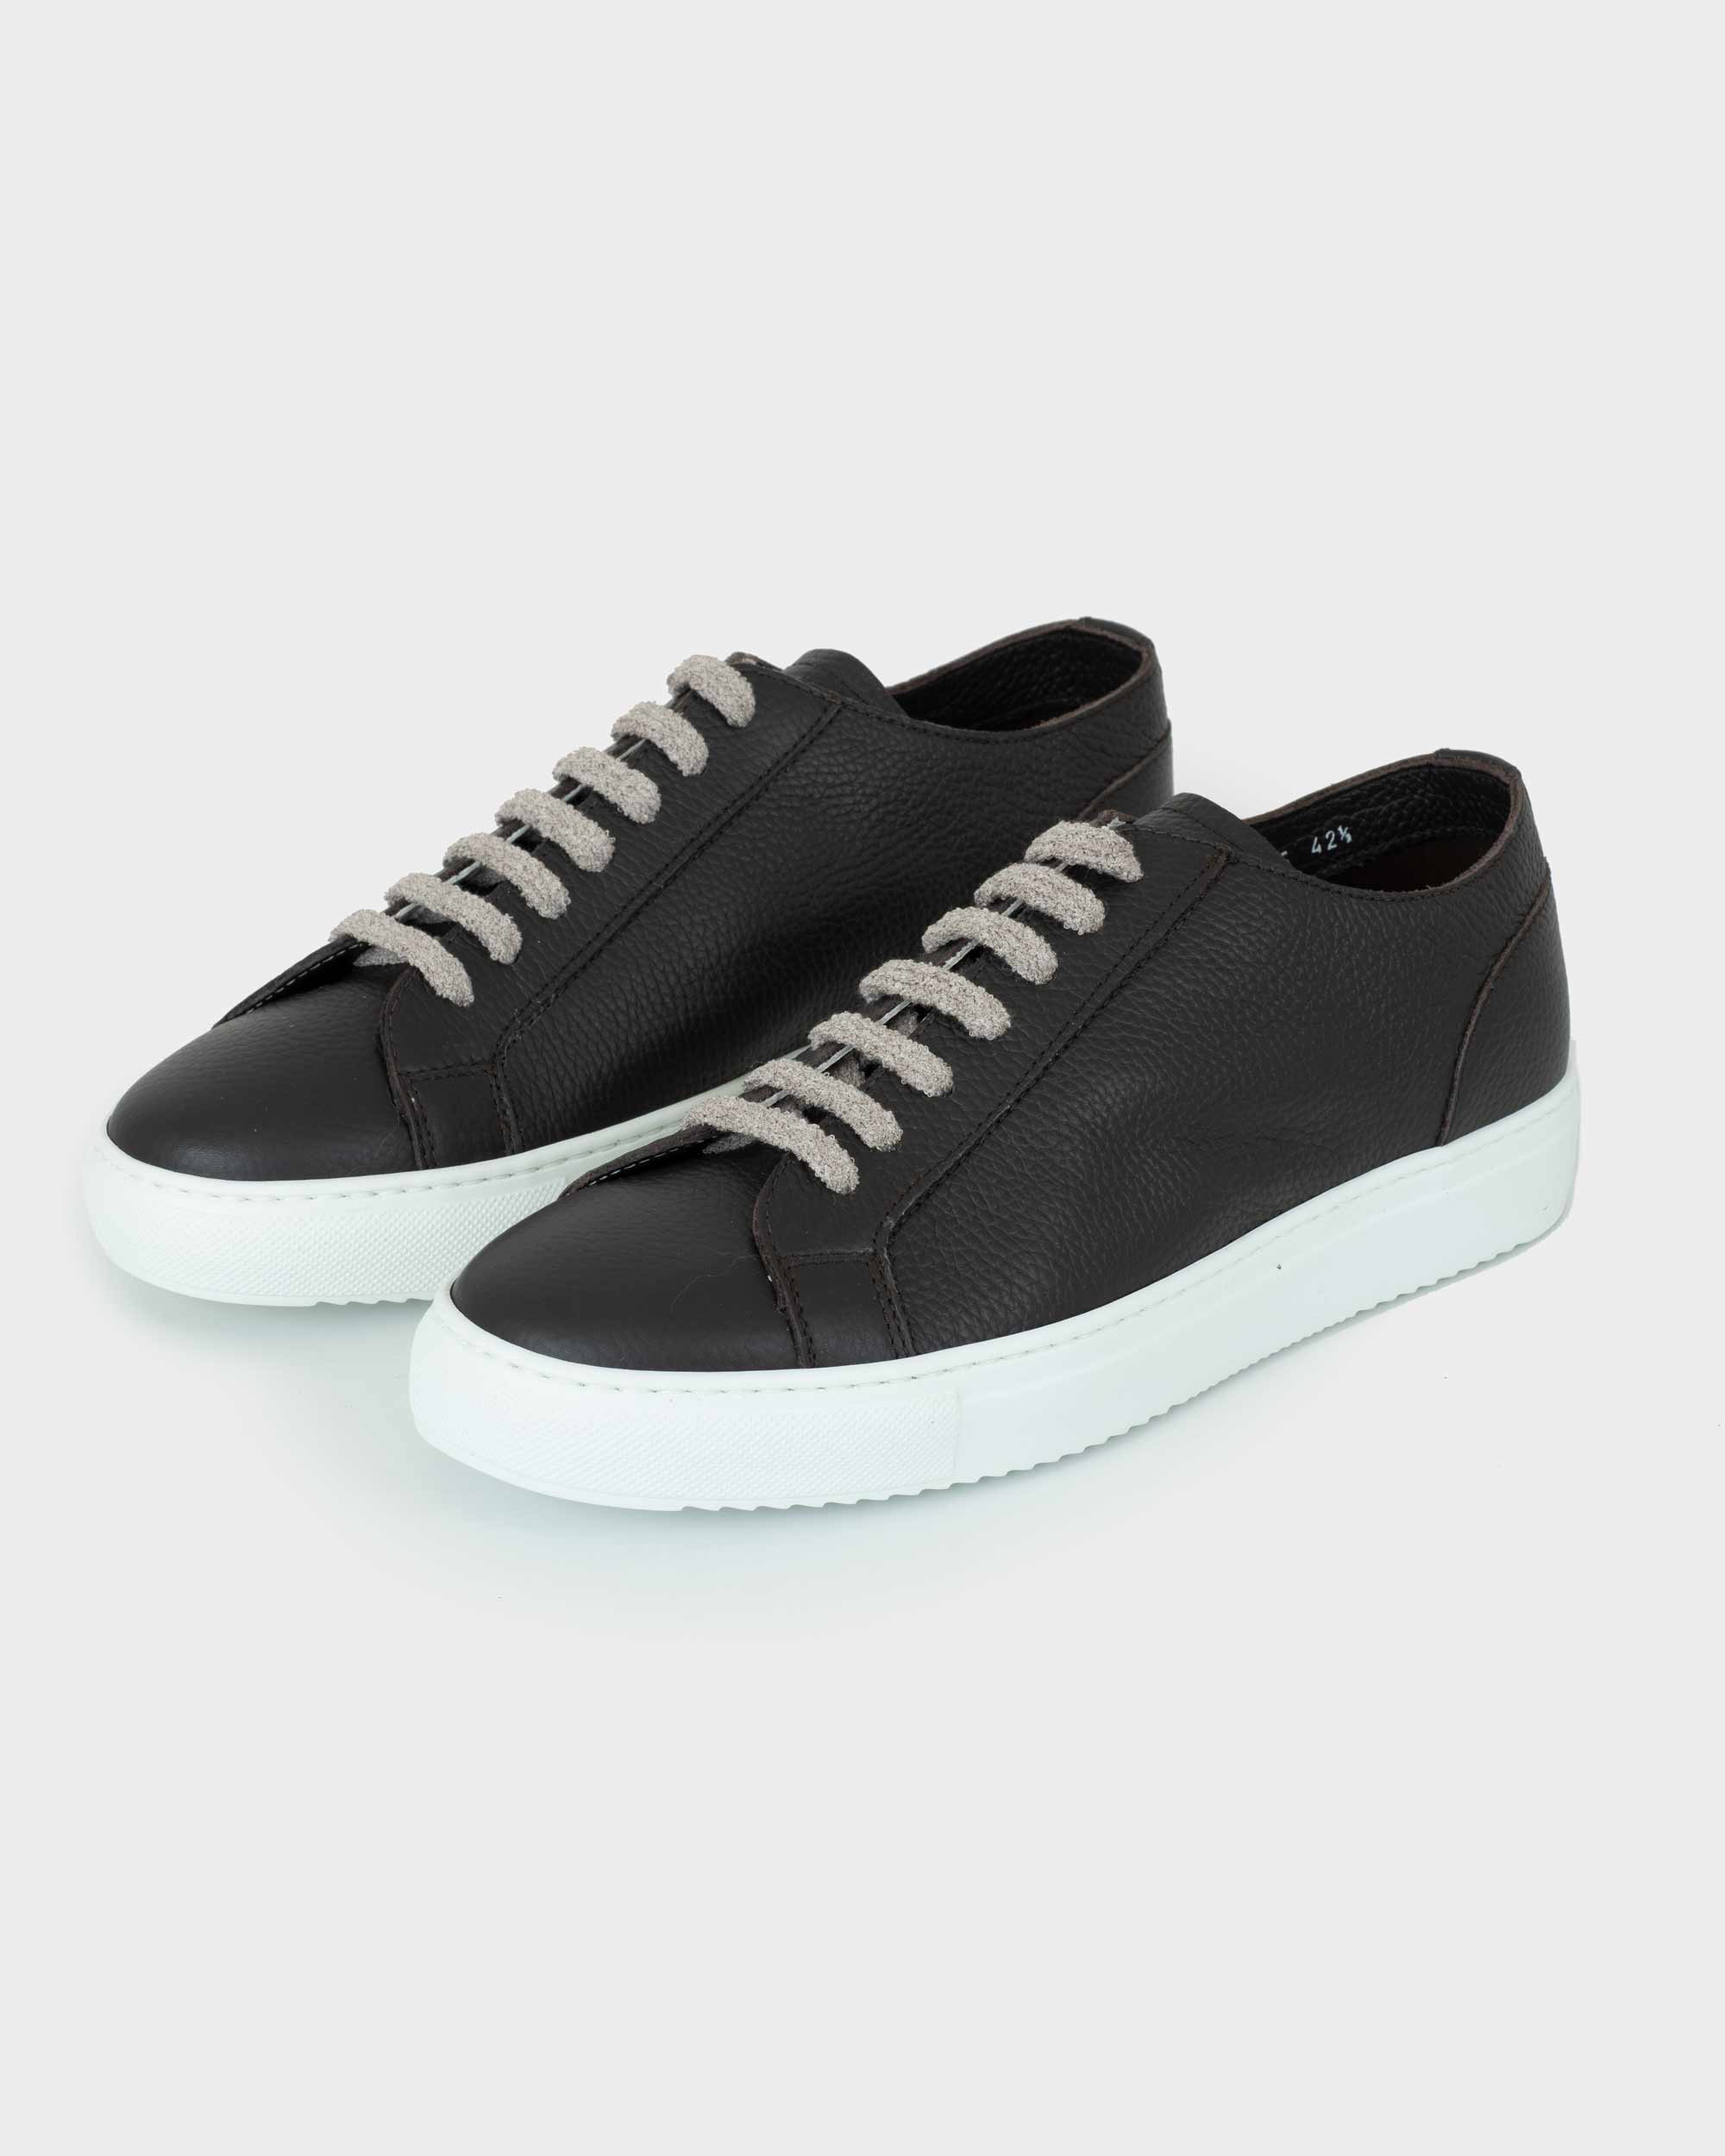 Doucal’s leather Sneakers